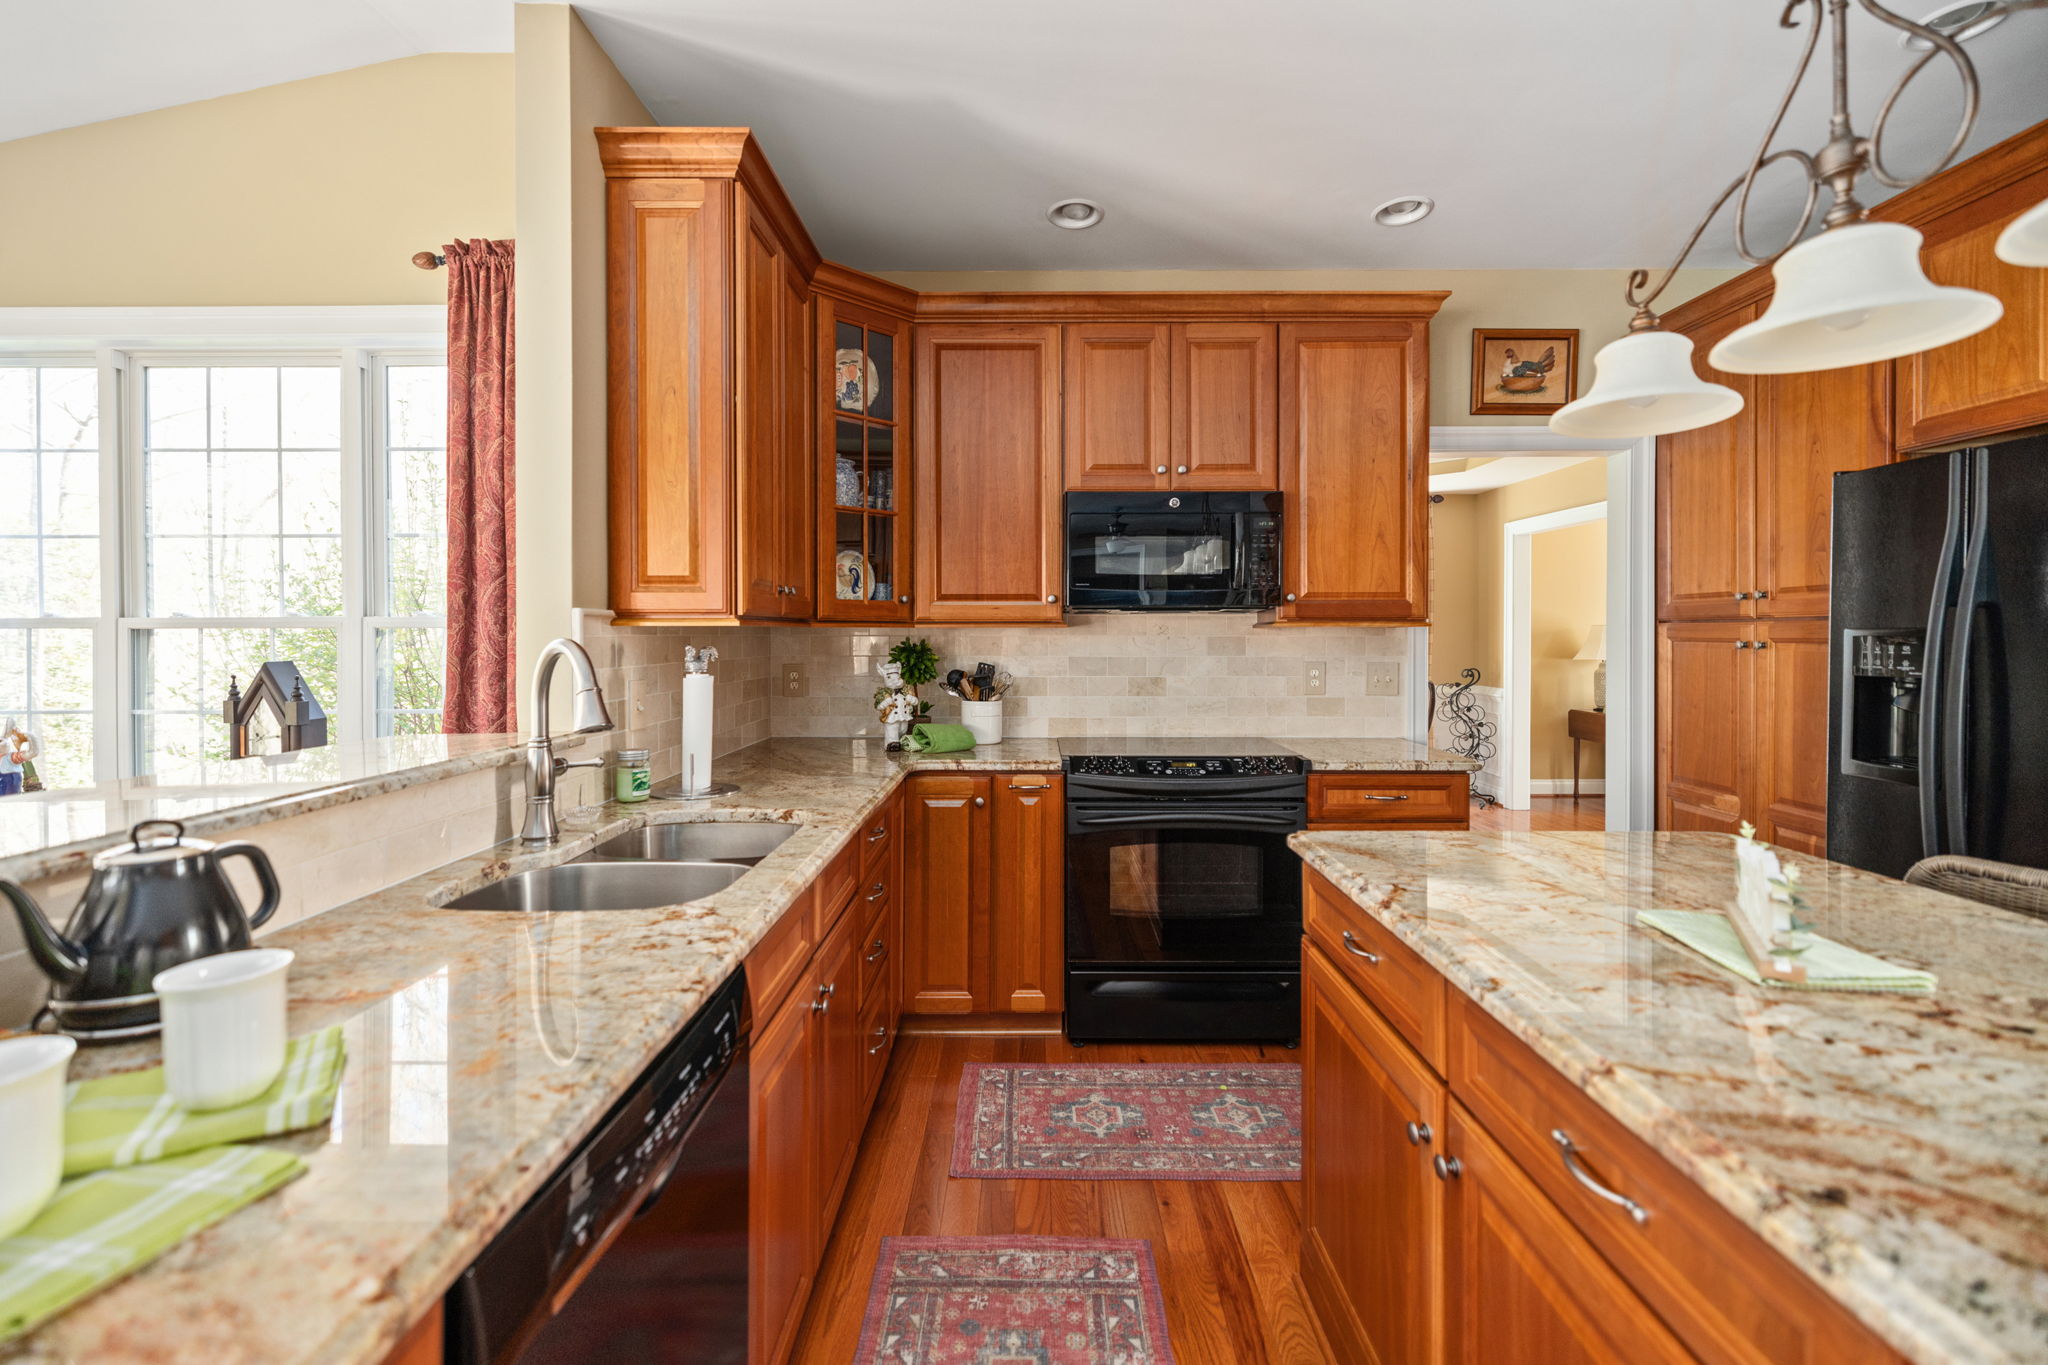 Warm cherry cabinetry